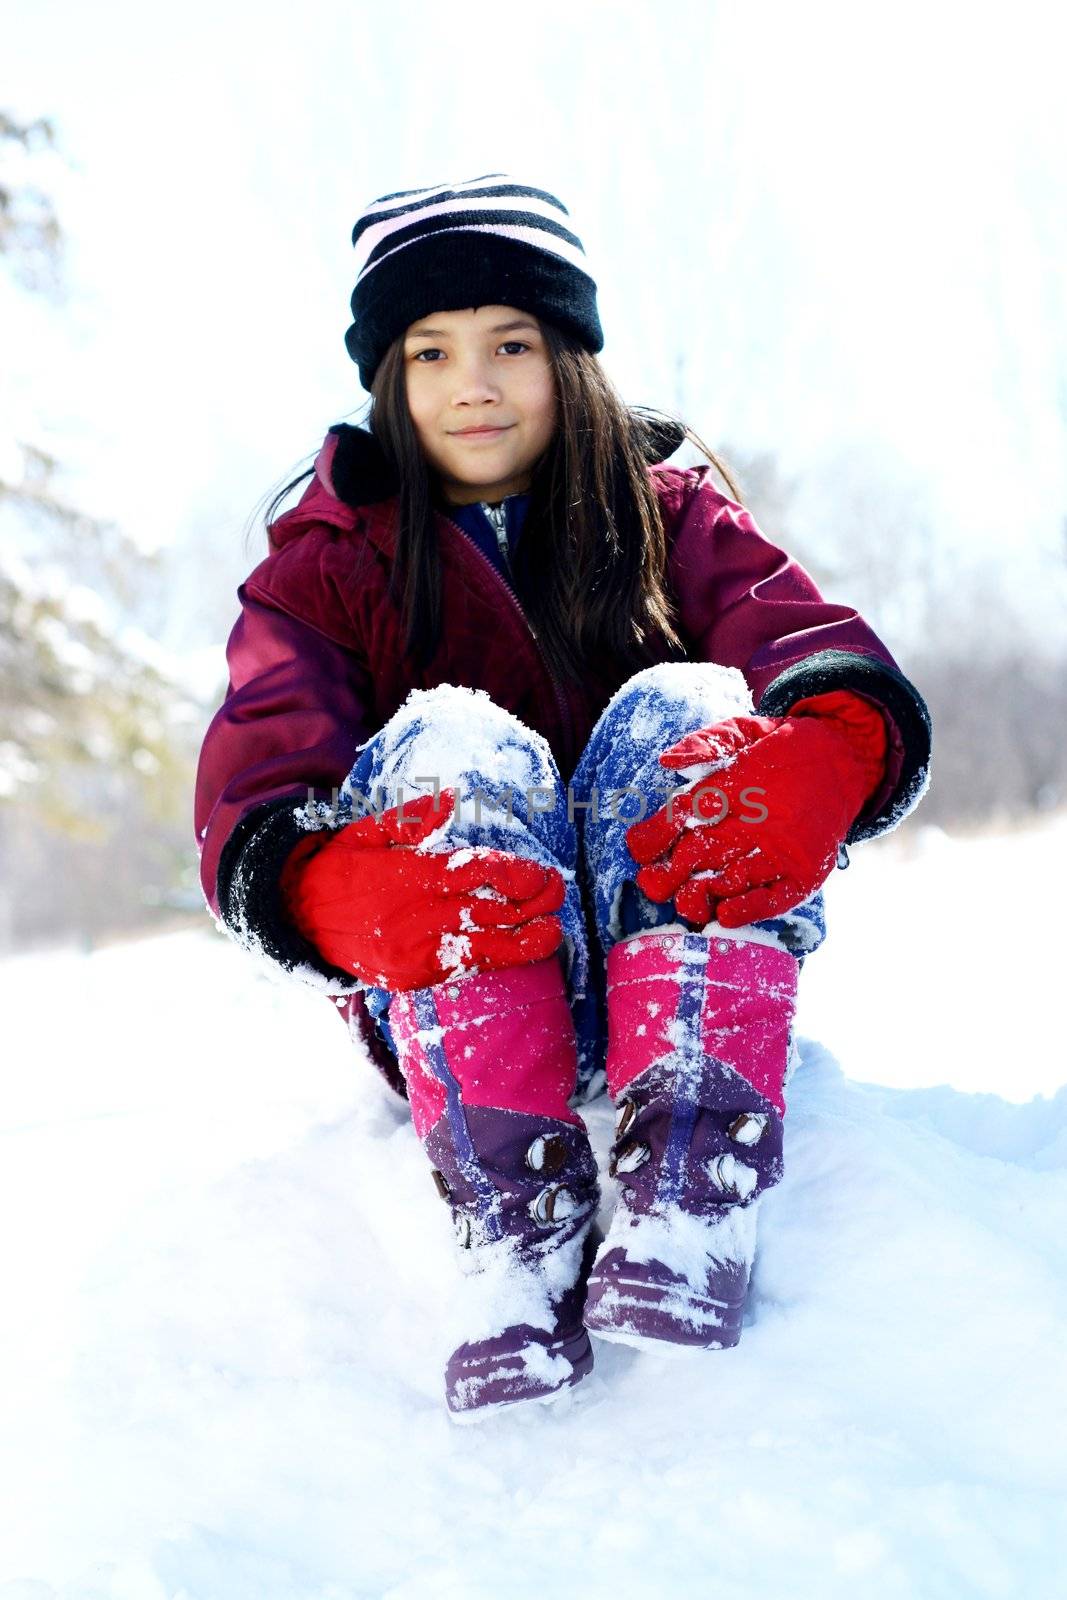 Young girl in winter attire playing on top of snow hill. Part Scandinavian, part asian descent.